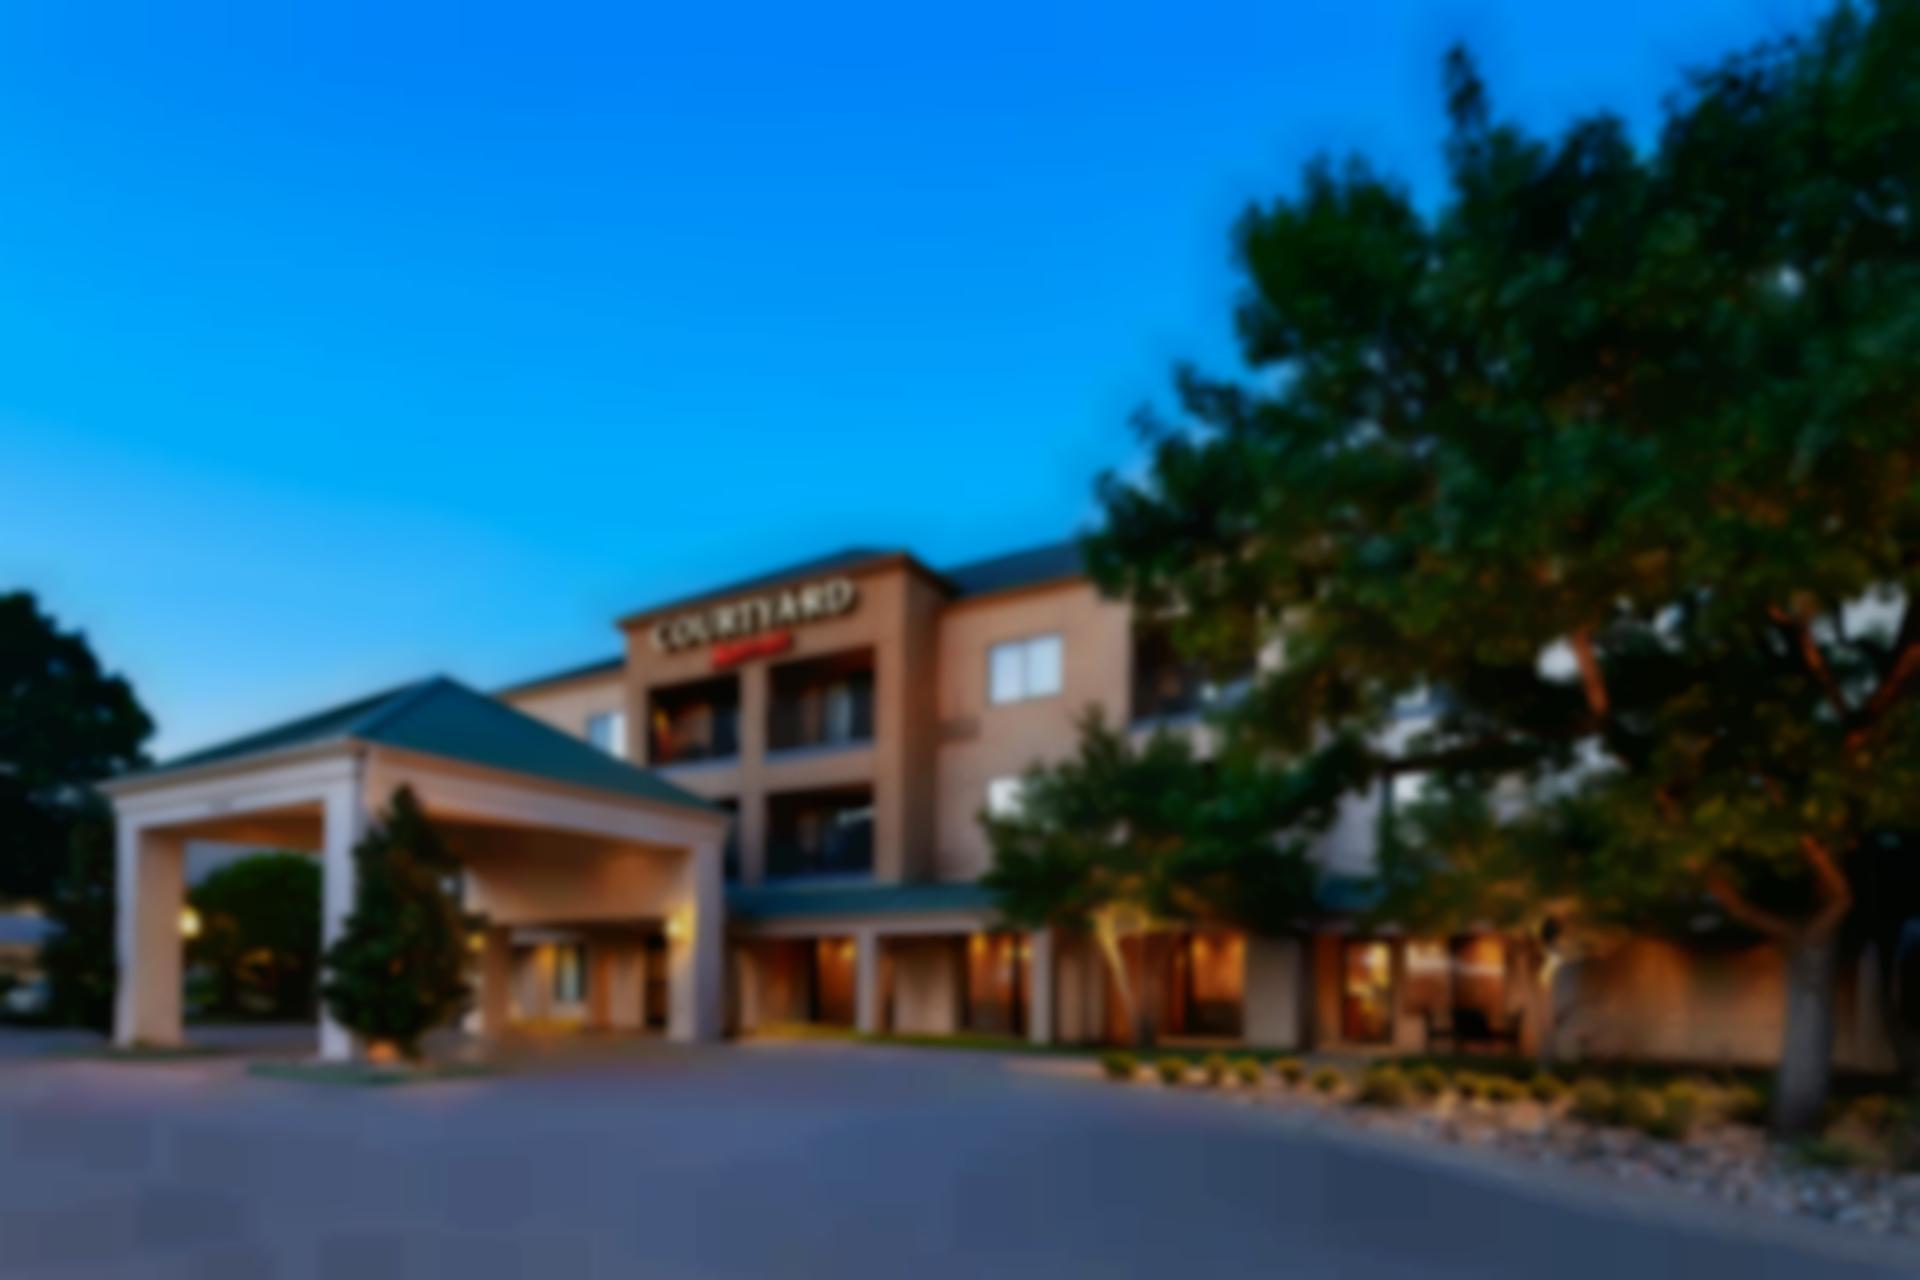 Courtyard by Marriott Dallas Plano in Legacy Park